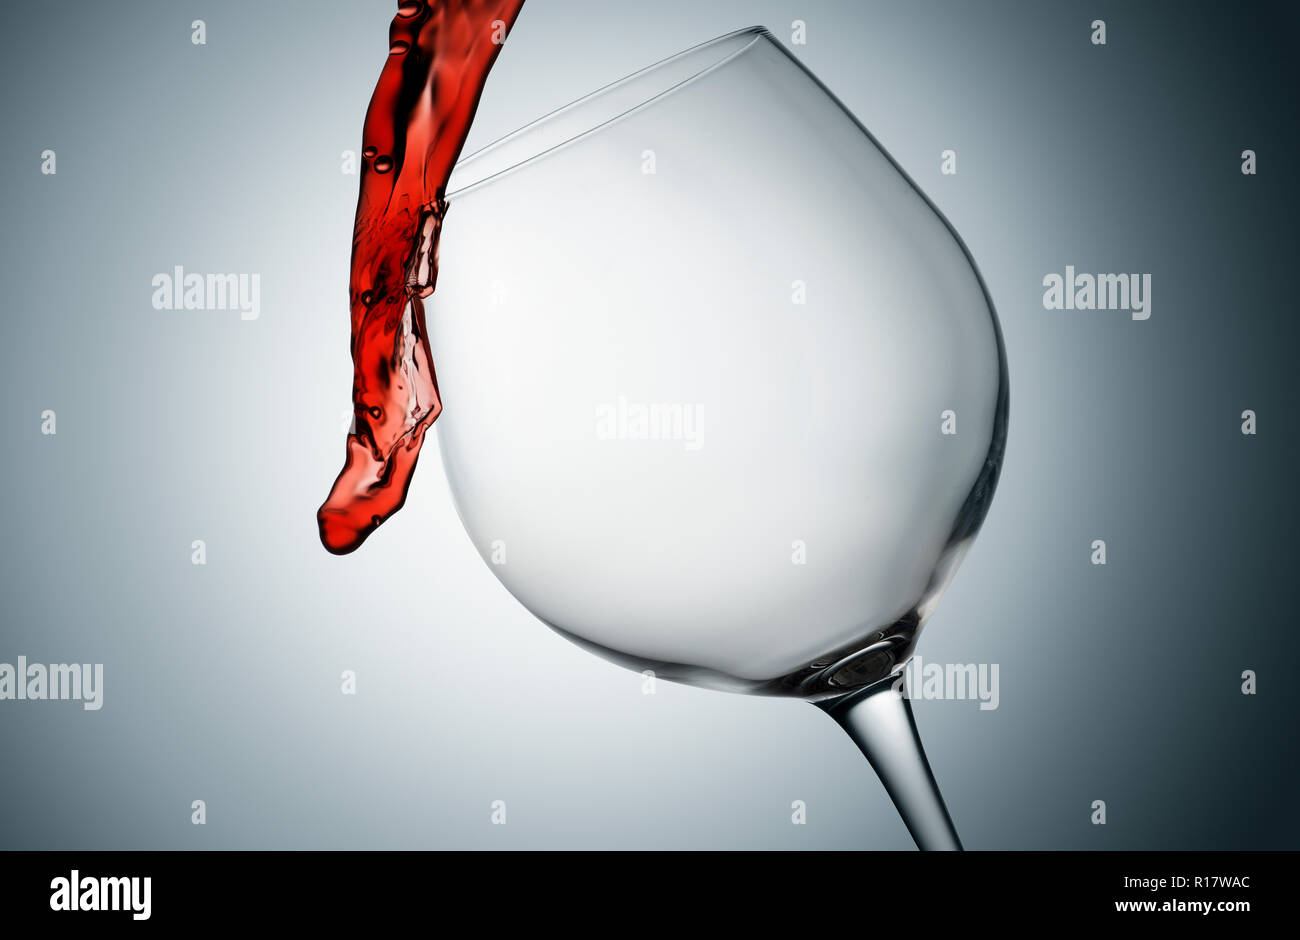 Pouring and spilling red wine out of tilted glass, plain background Stock Photo